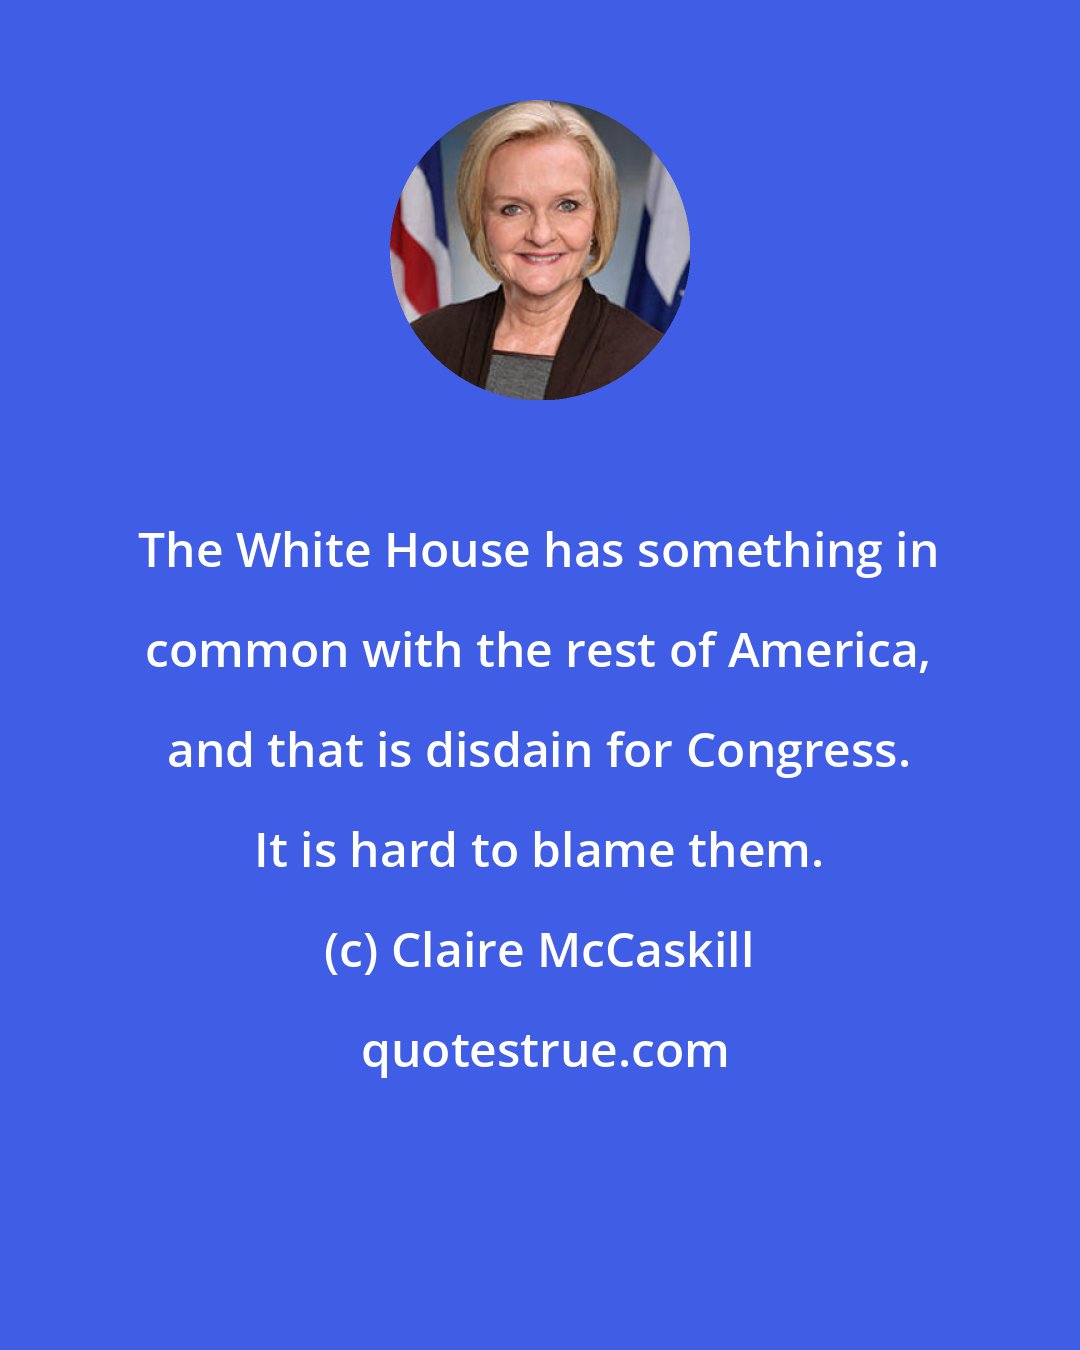 Claire McCaskill: The White House has something in common with the rest of America, and that is disdain for Congress. It is hard to blame them.